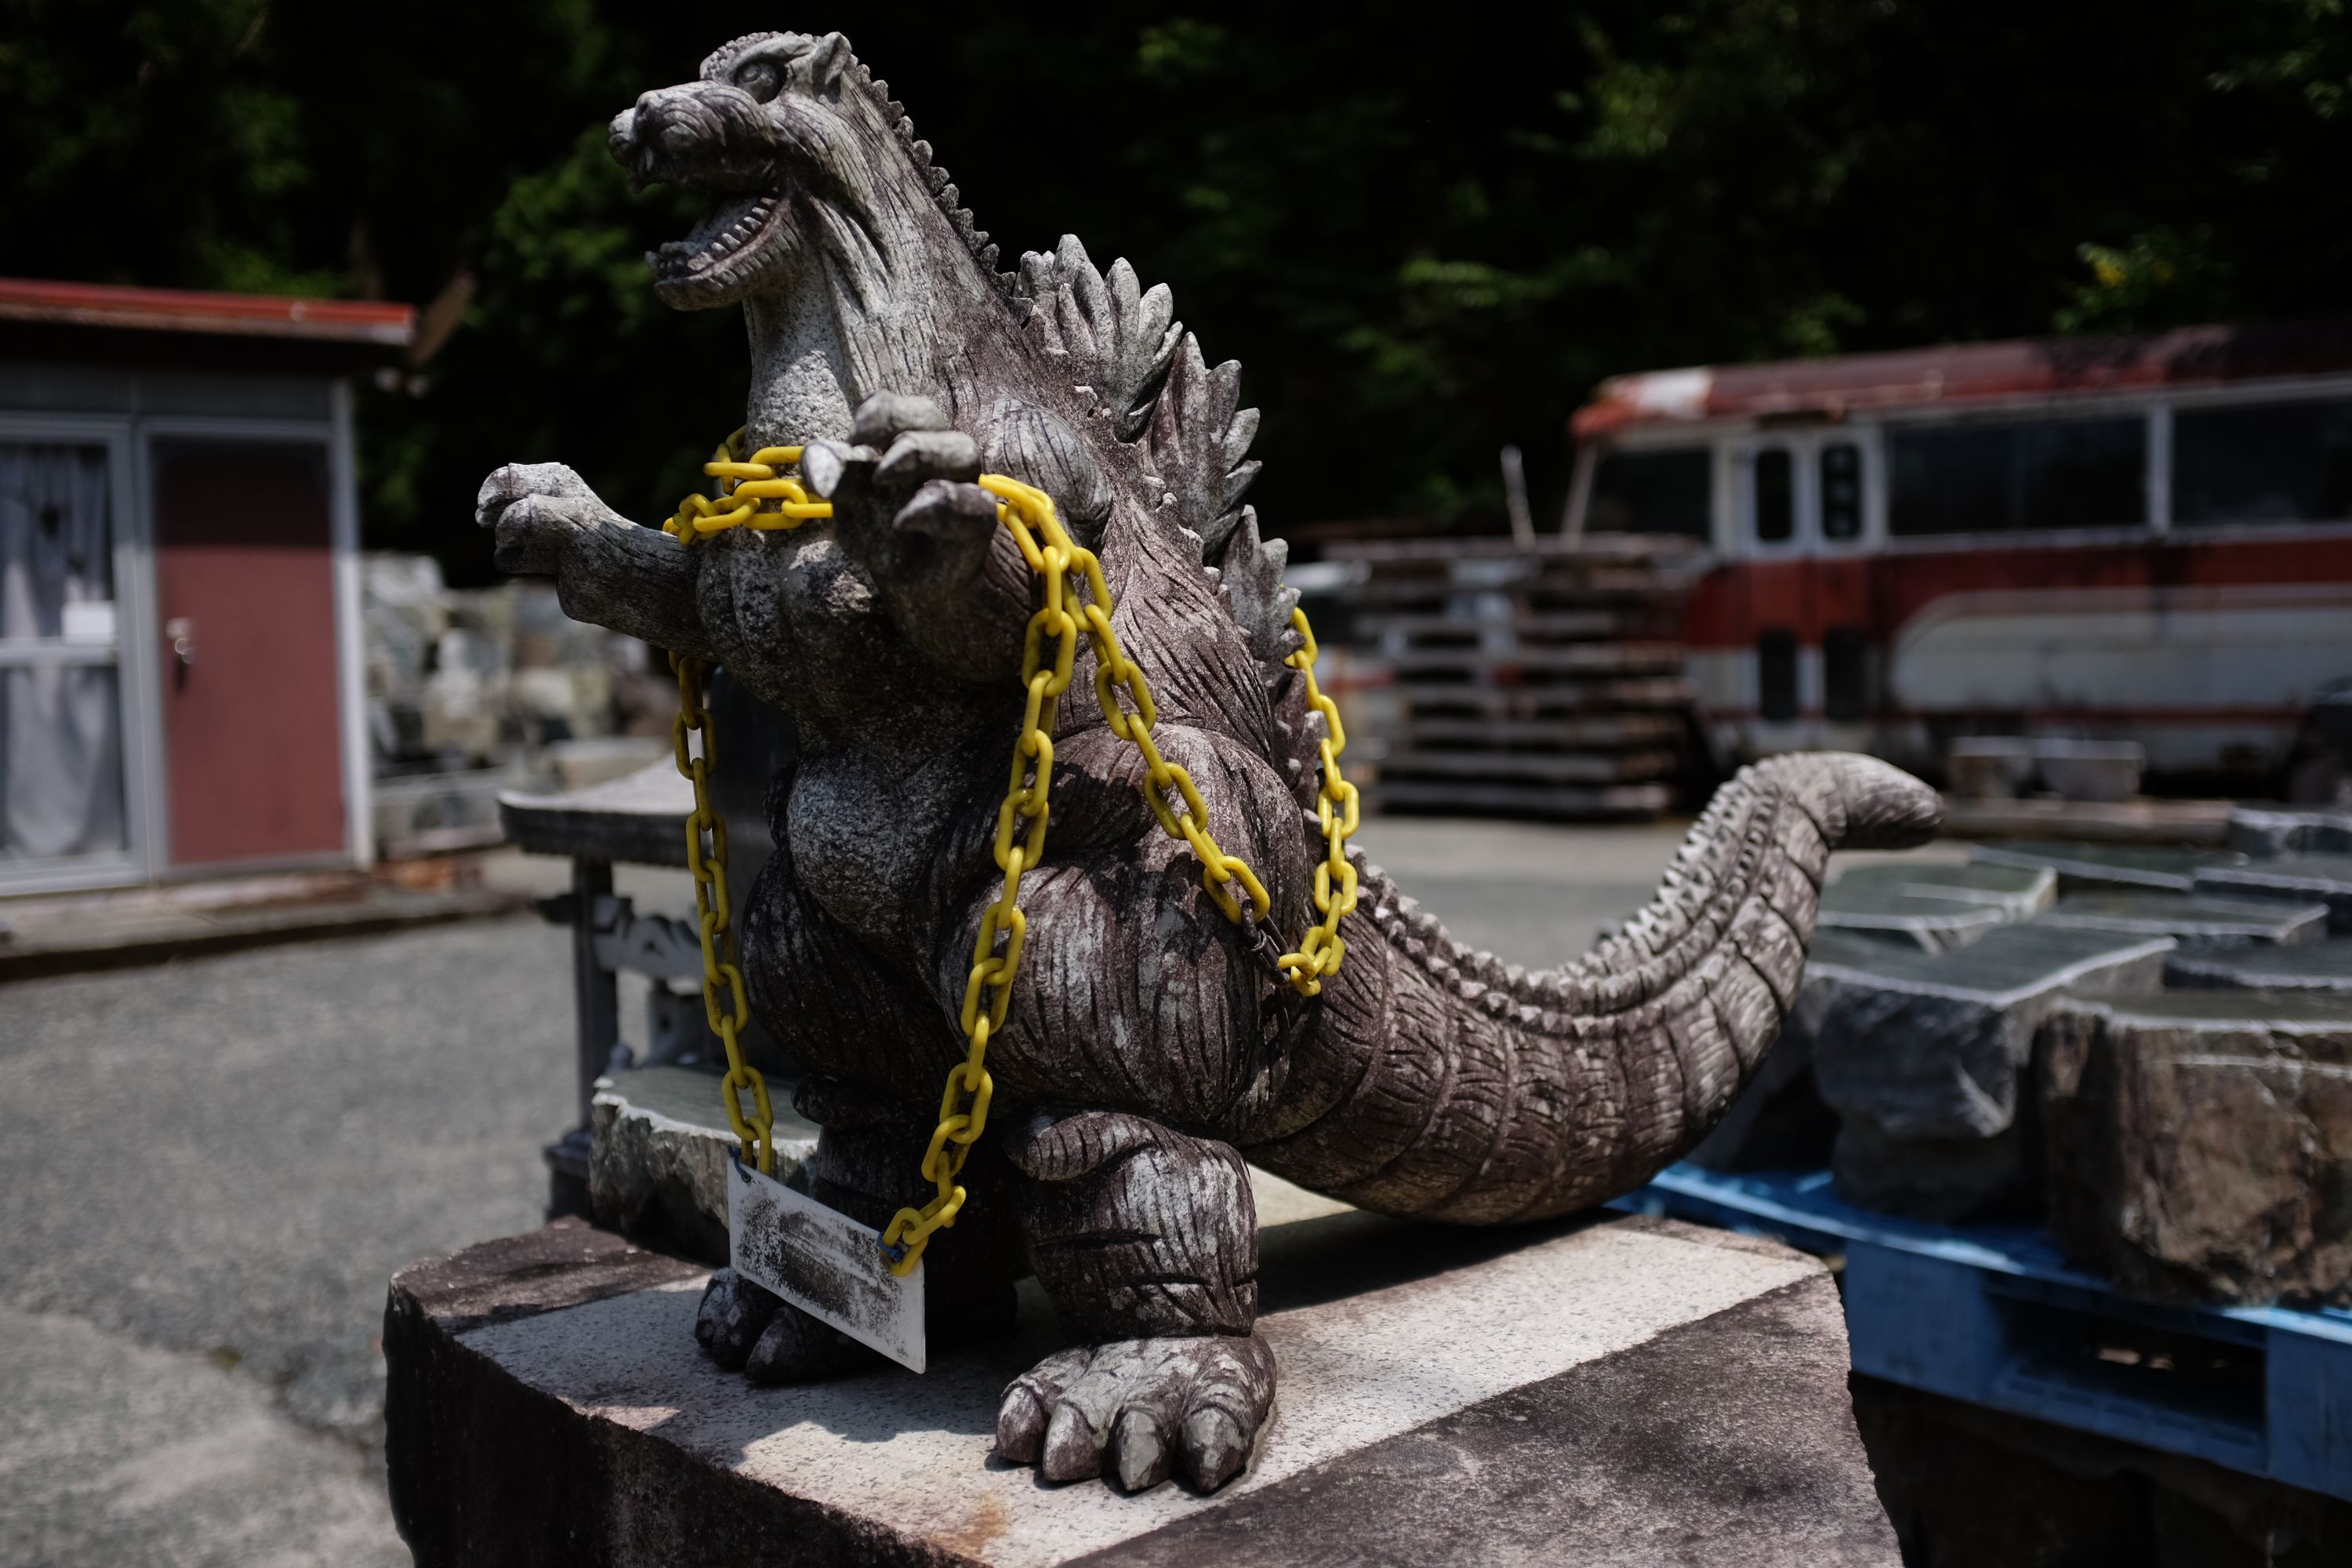 A stone figure of Godzilla bound with a yellow chain at a stoneworker’s shop.